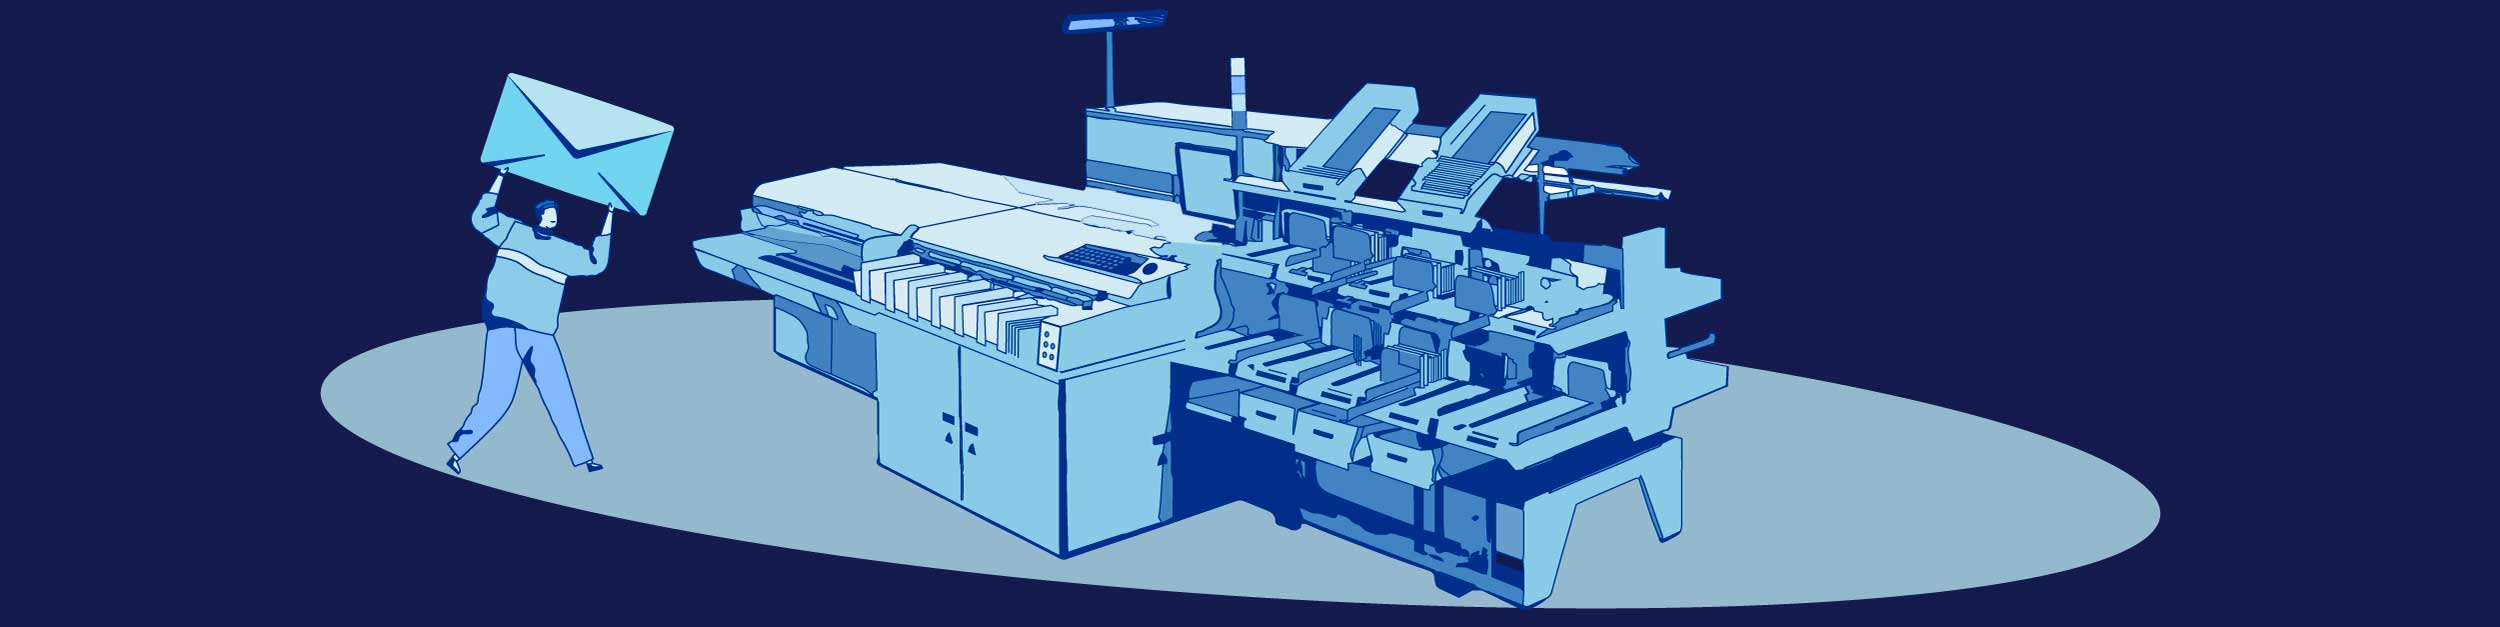 Mail and parcels high-speed sorting machine illustration